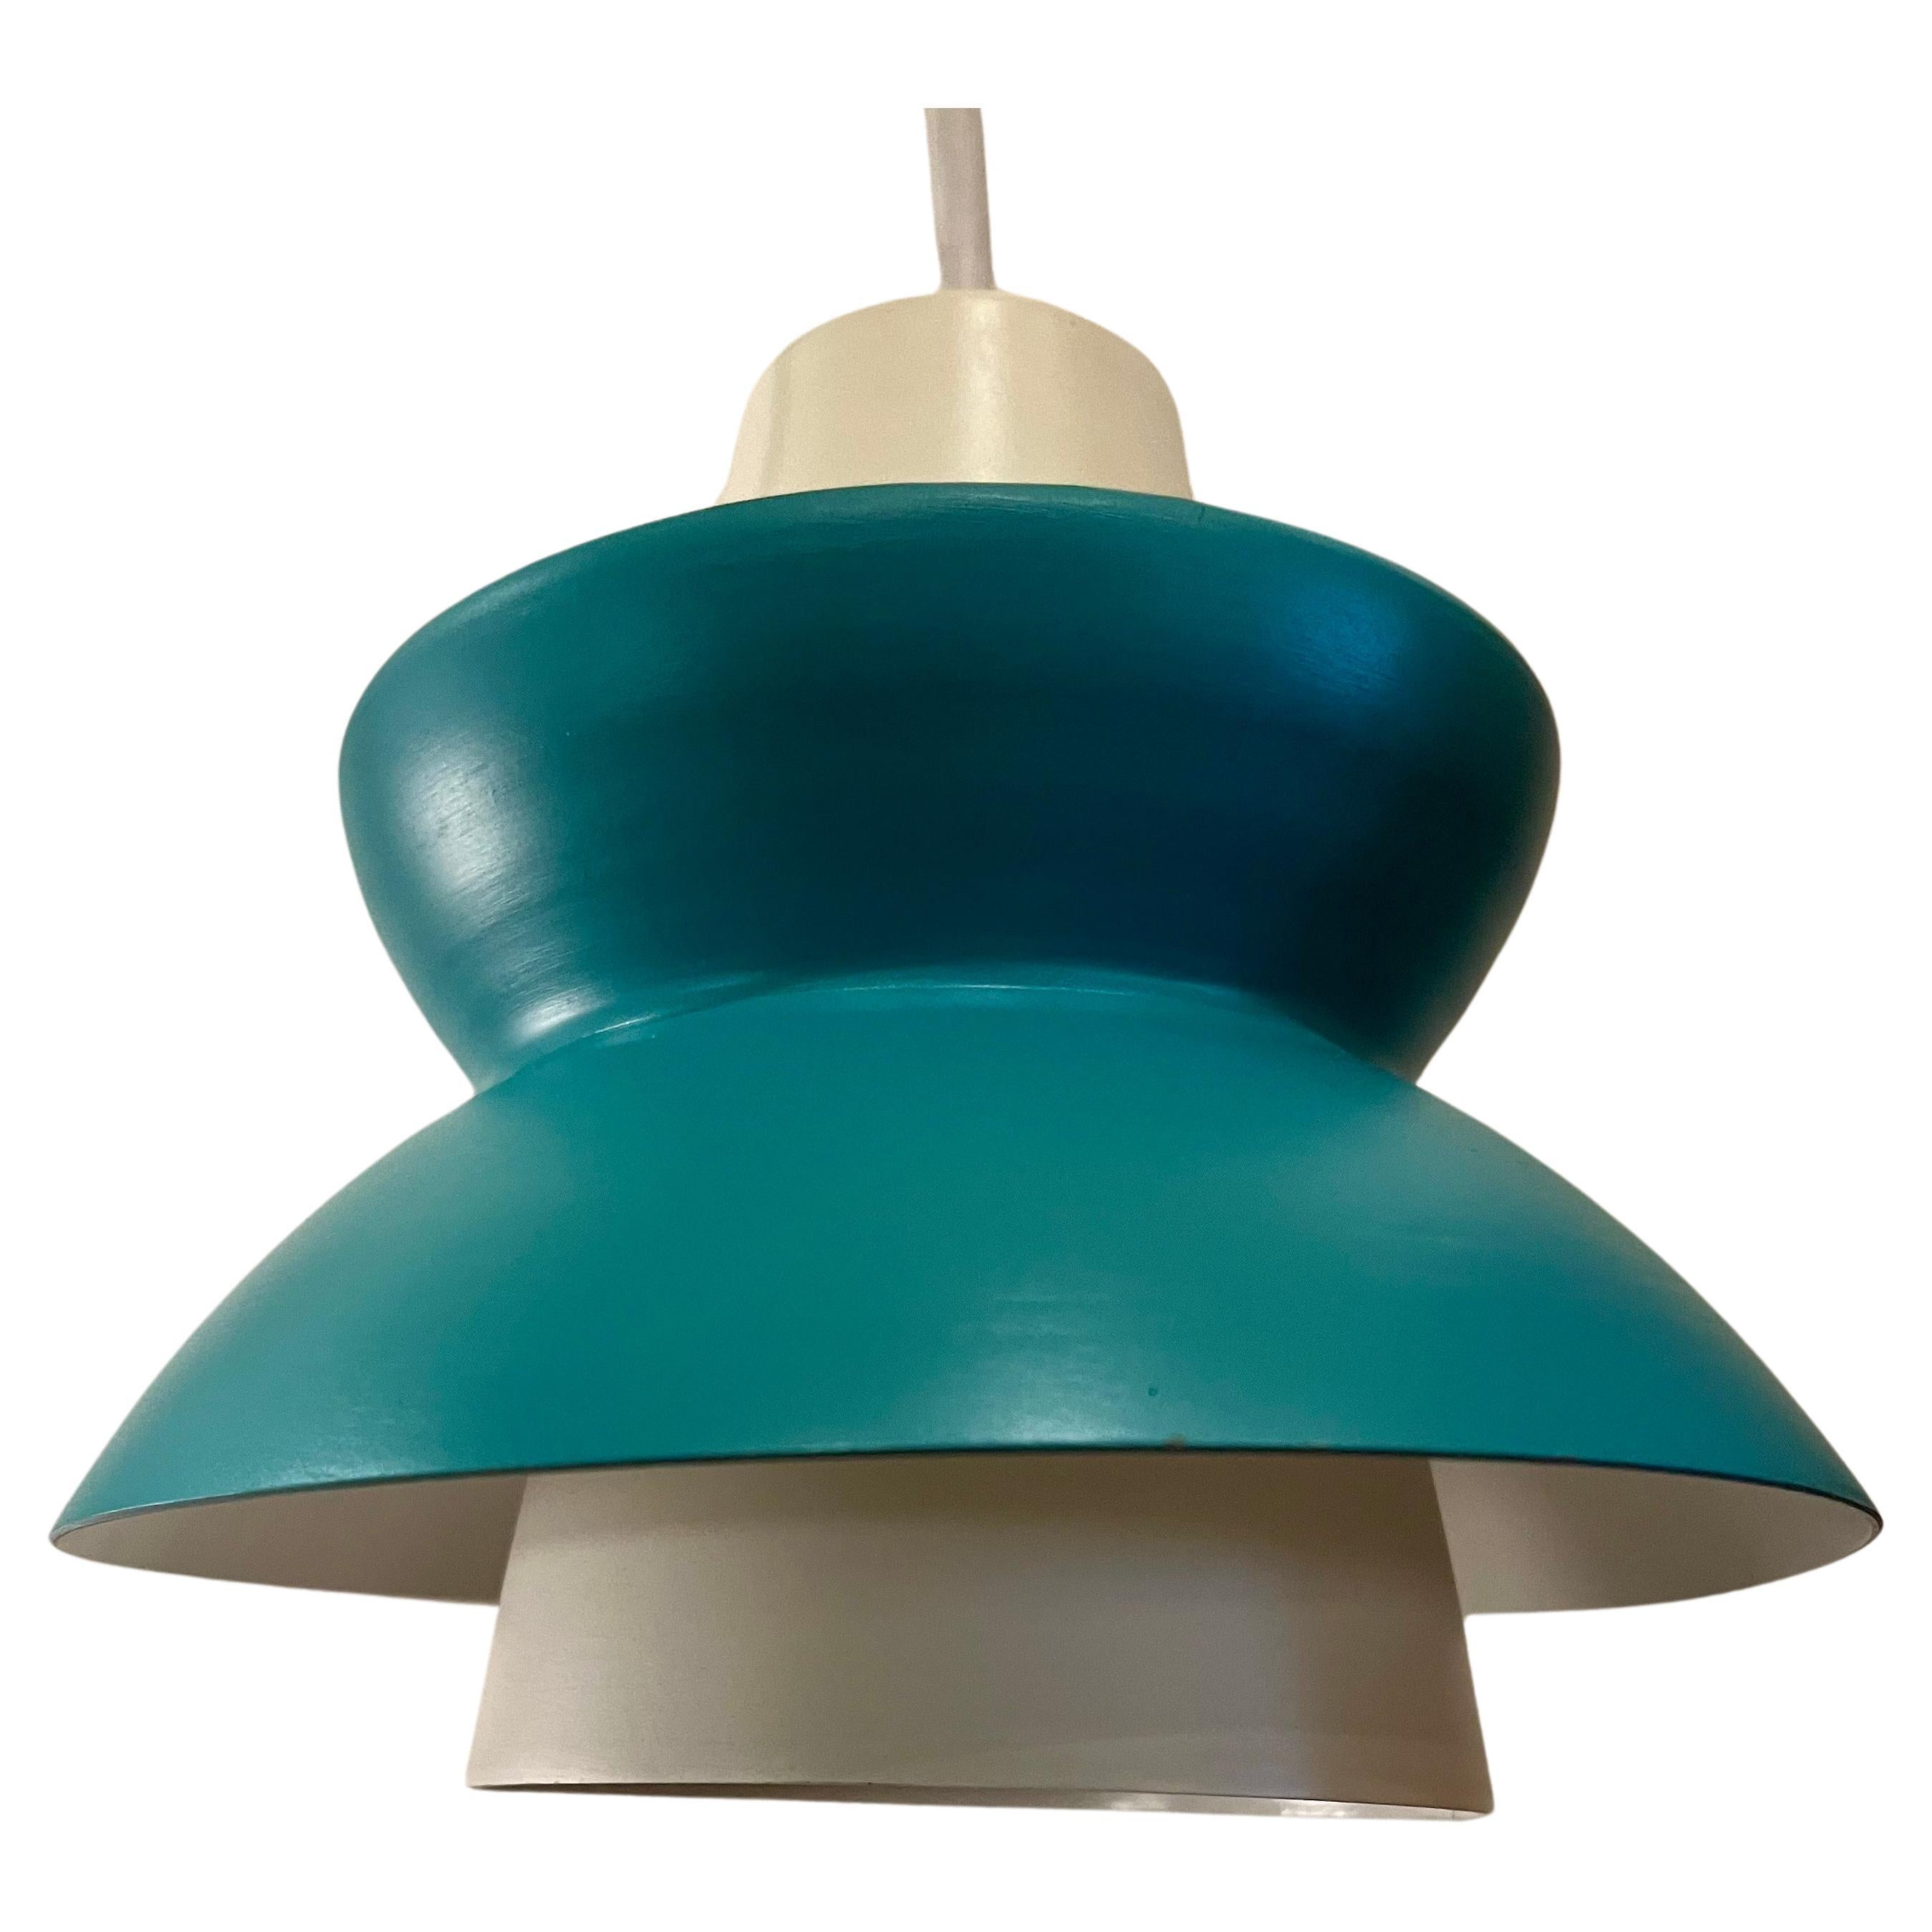 Danish Modern Small Pendant Lamp by Claus Bonderup & Torsten for Fog & Morup In Excellent Condition For Sale In San Diego, CA